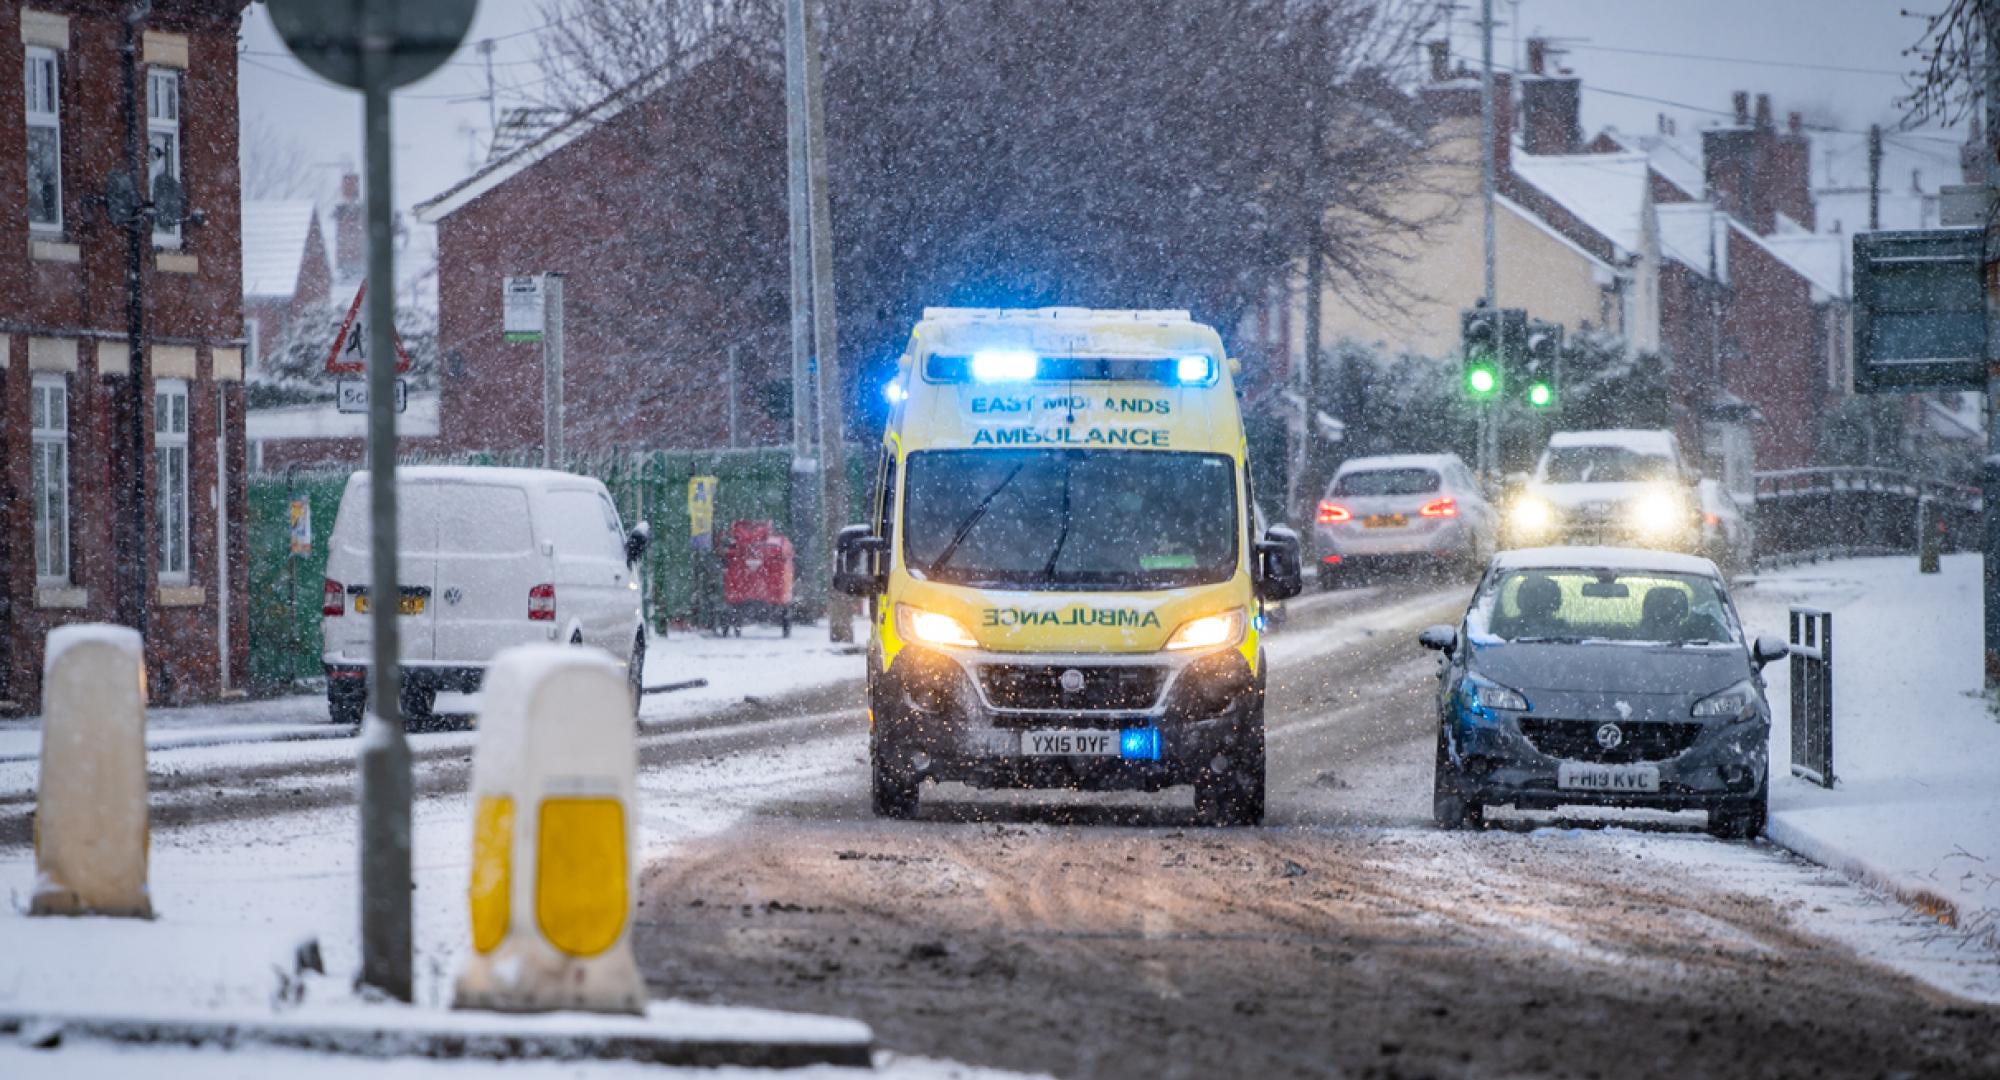 Ambulance driving through snow depicting the NHS winter pressures